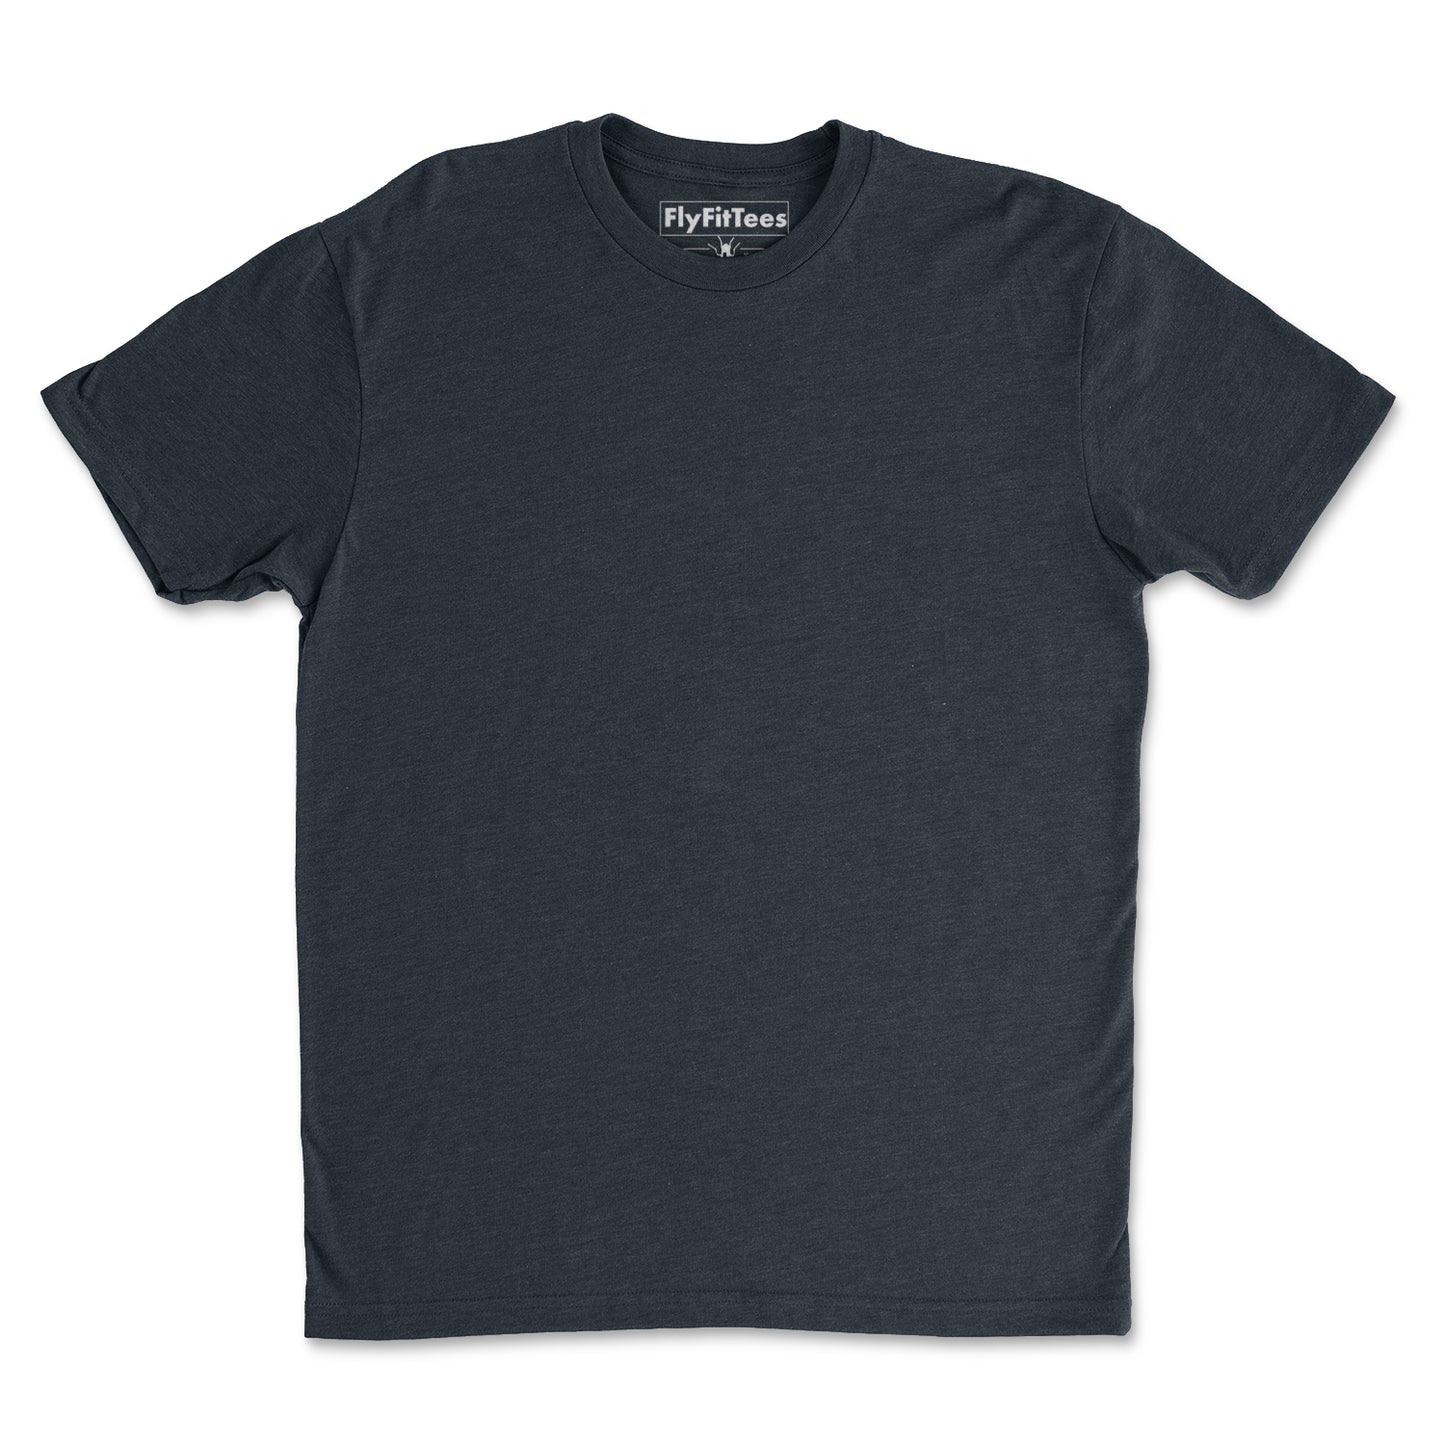 SoFly Original Perfect Fit Tee - 3 Pack - Black - Gray - Navy